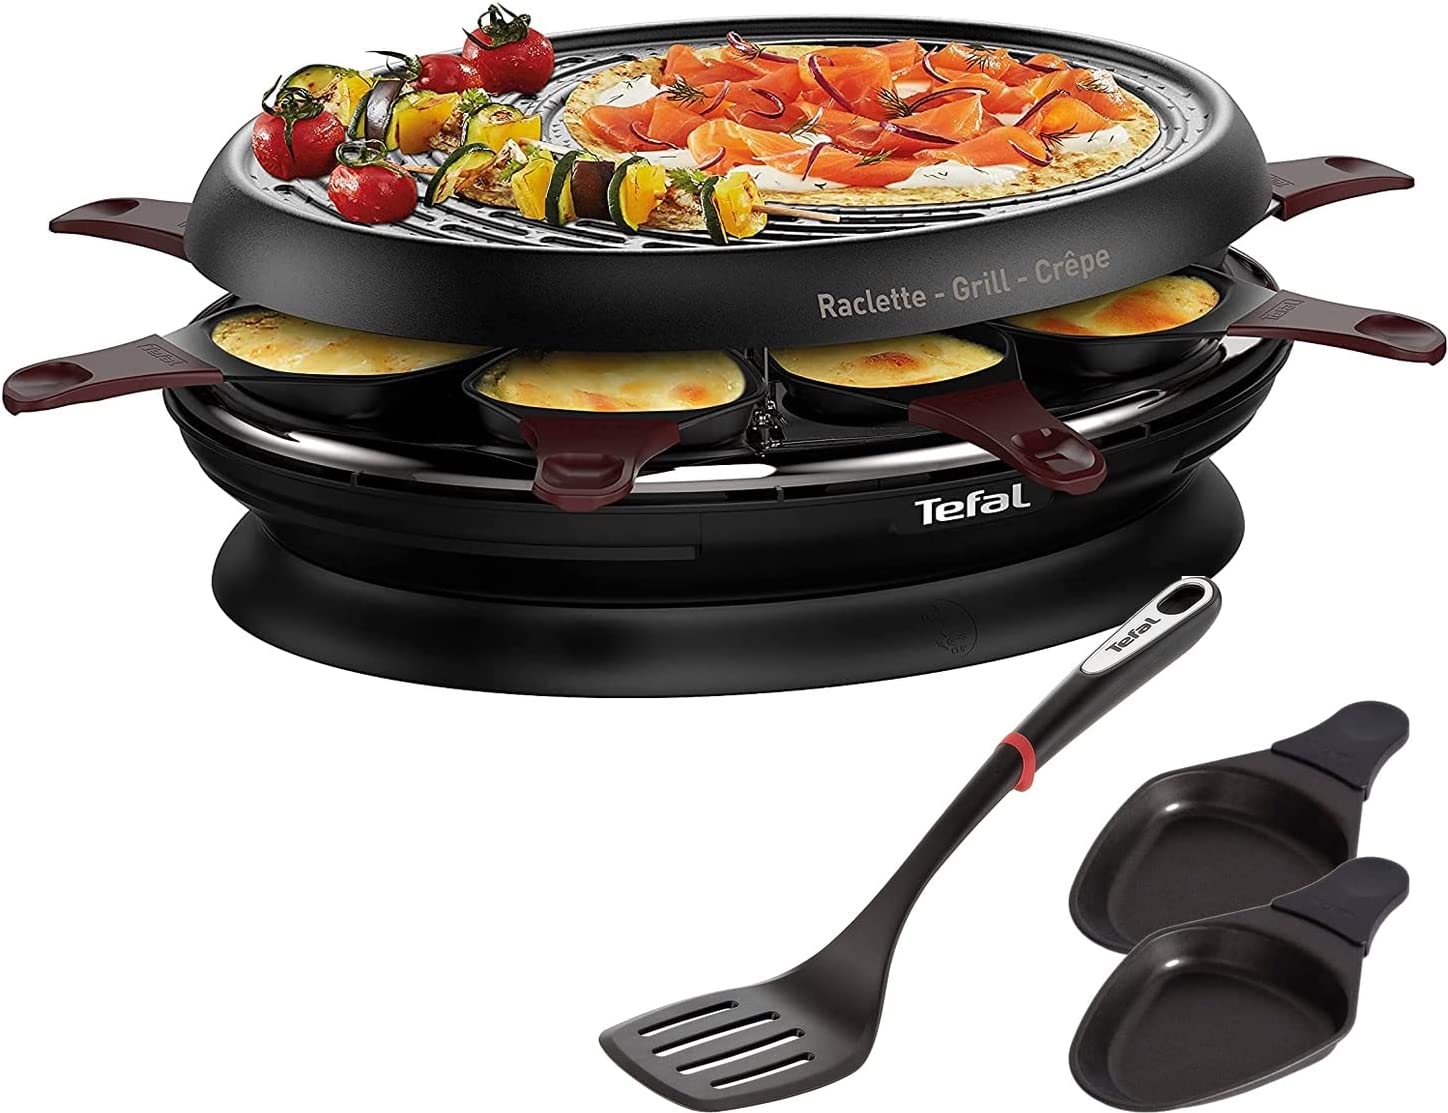 Tefal Electric Raclette, Grill and Crepes Maker 3-in-1 1050 W + Ingenio Spatula, 8 Pans, Stowable in the Device, up to 8 People, Non-Stick Coating, Dishwasher Safe Thermo Spot